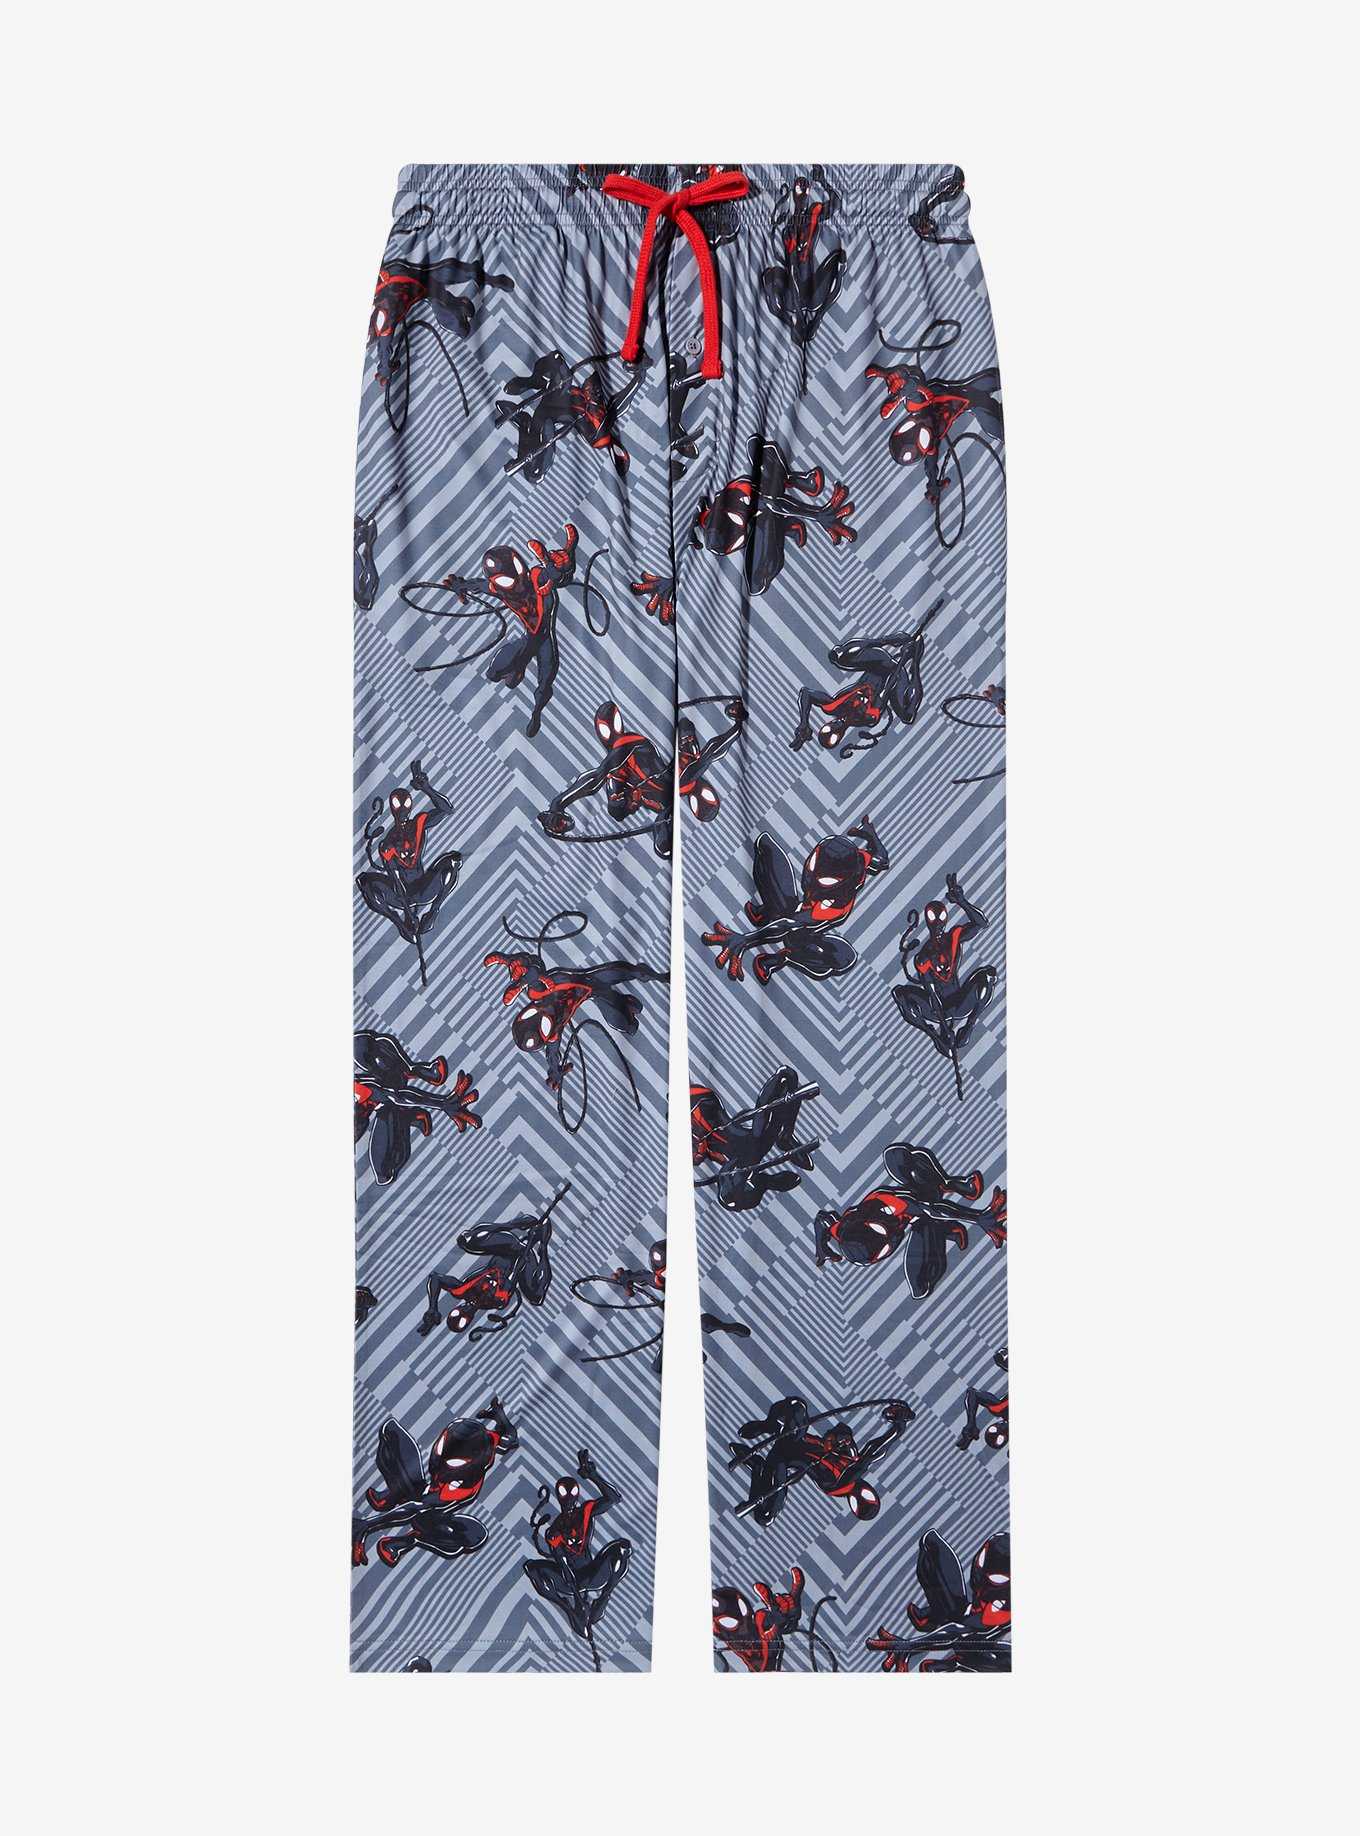 Marvel Spider-Man Miles Morales Allover Print Sleep Pants - BoxLunch Exclusive, , hi-res